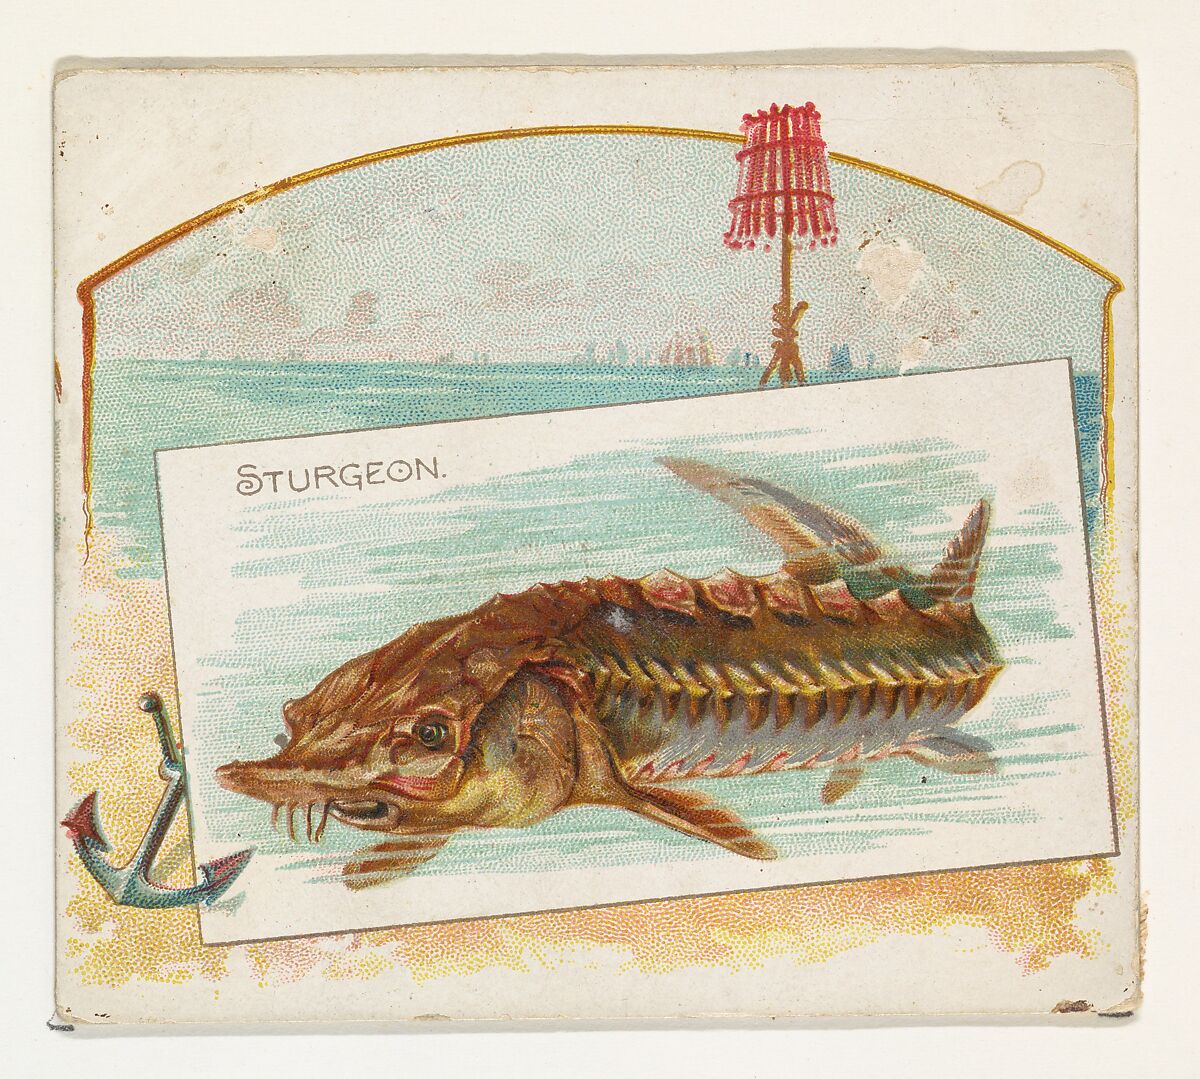 Sturgeon, from Fish from American Waters series (N39) for Allen & Ginter Cigarettes, Issued by Allen &amp; Ginter (American, Richmond, Virginia), Commercial color lithograph 